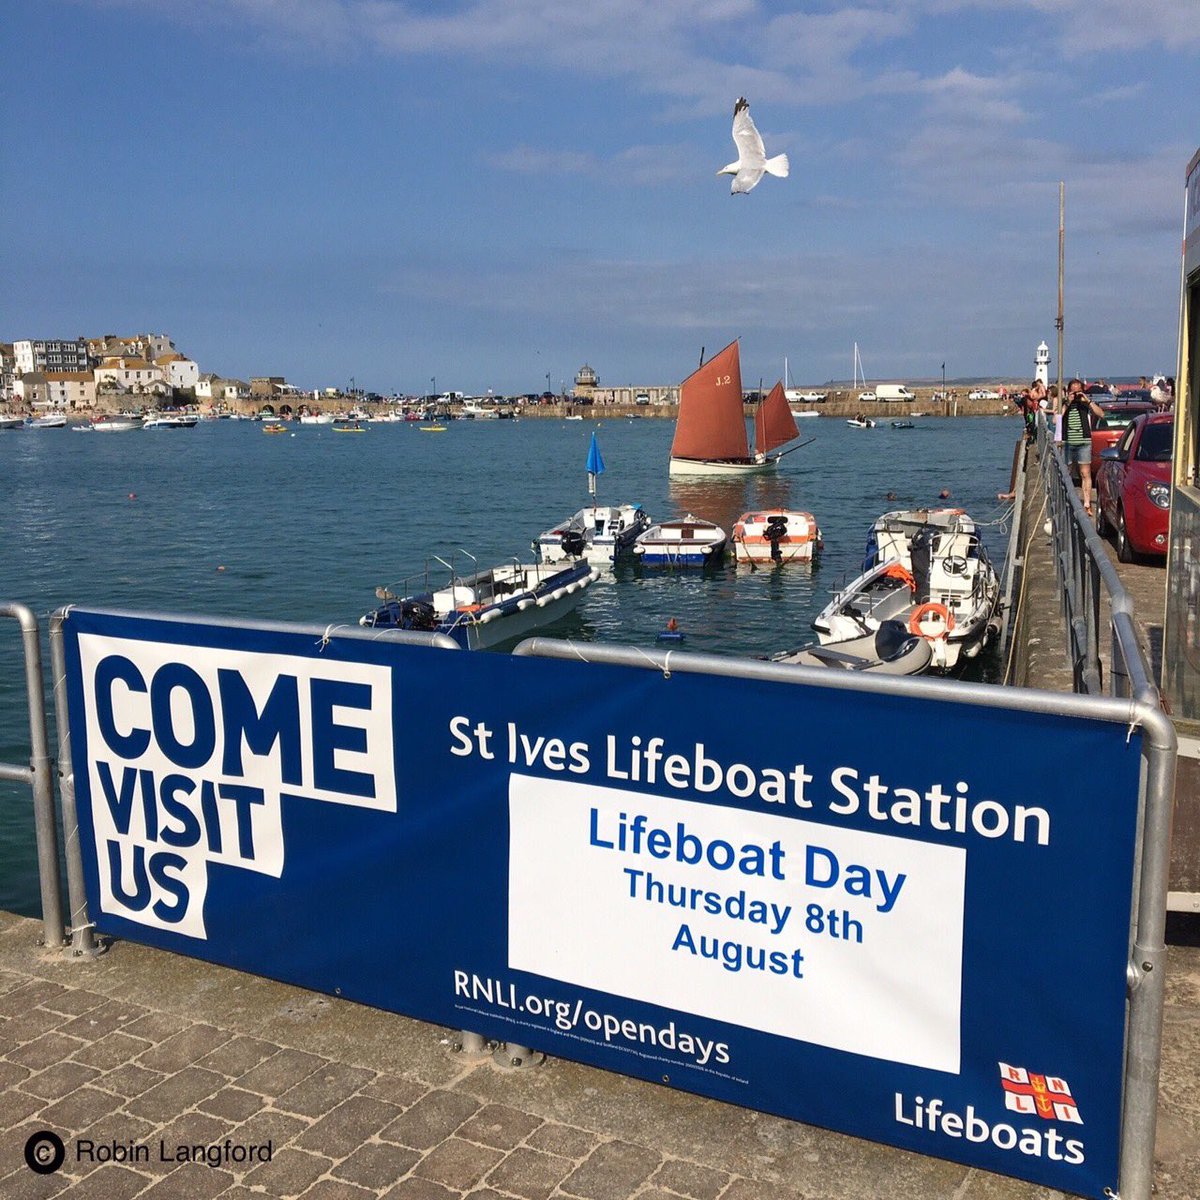 What you doing on Thursday 8th August? Why not pop down to #stives lifeboat station to our lifeboat day event. Meet the crew, check out all the stalls, watch some operational displays - fun for all the family. Help us to continue to #SaveLivesAtSea #RNLI